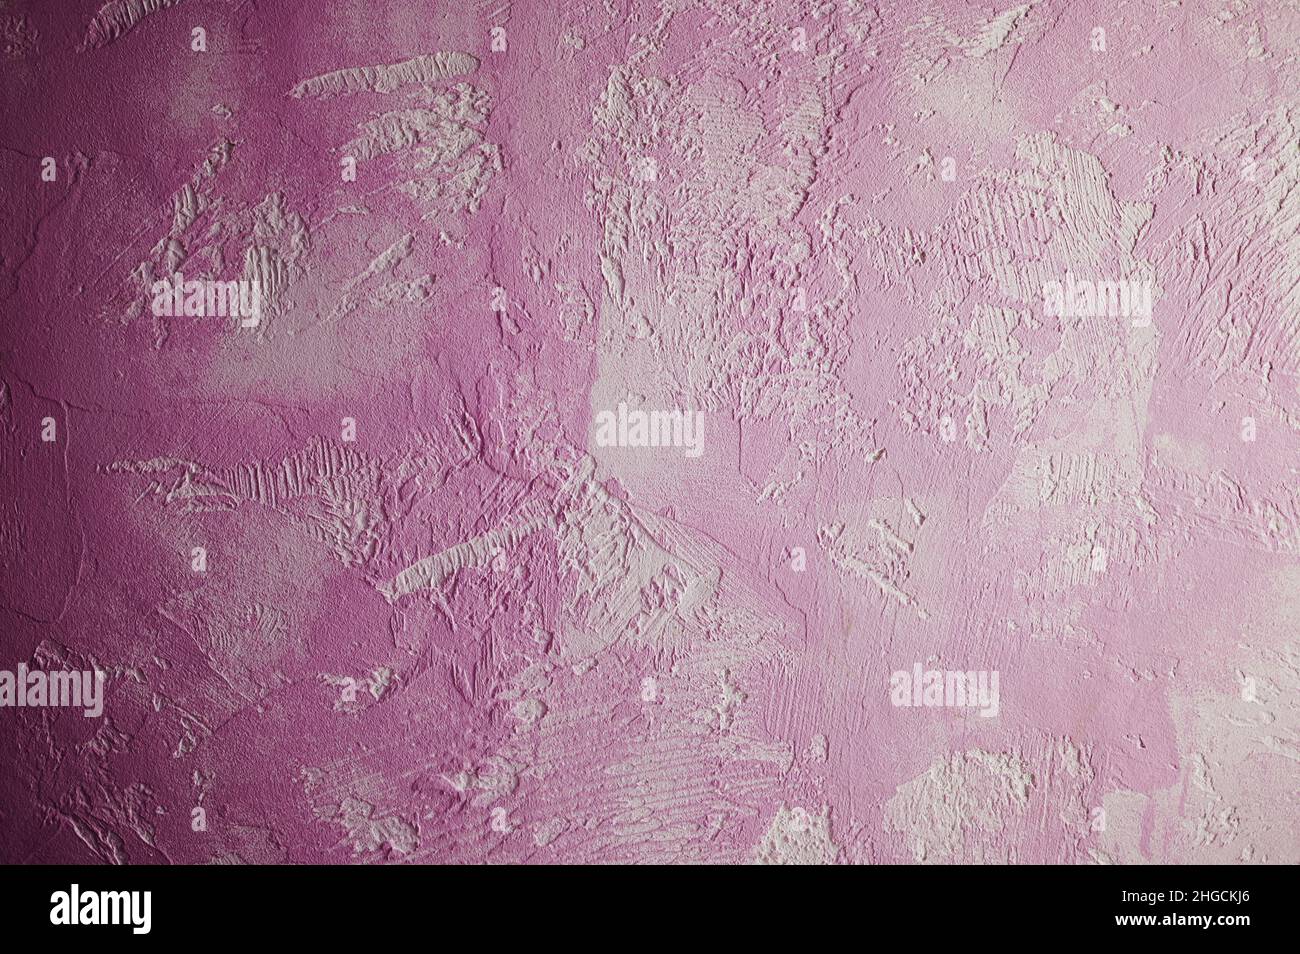 Abstract textured rose color wall surface macro close up view Stock Photo